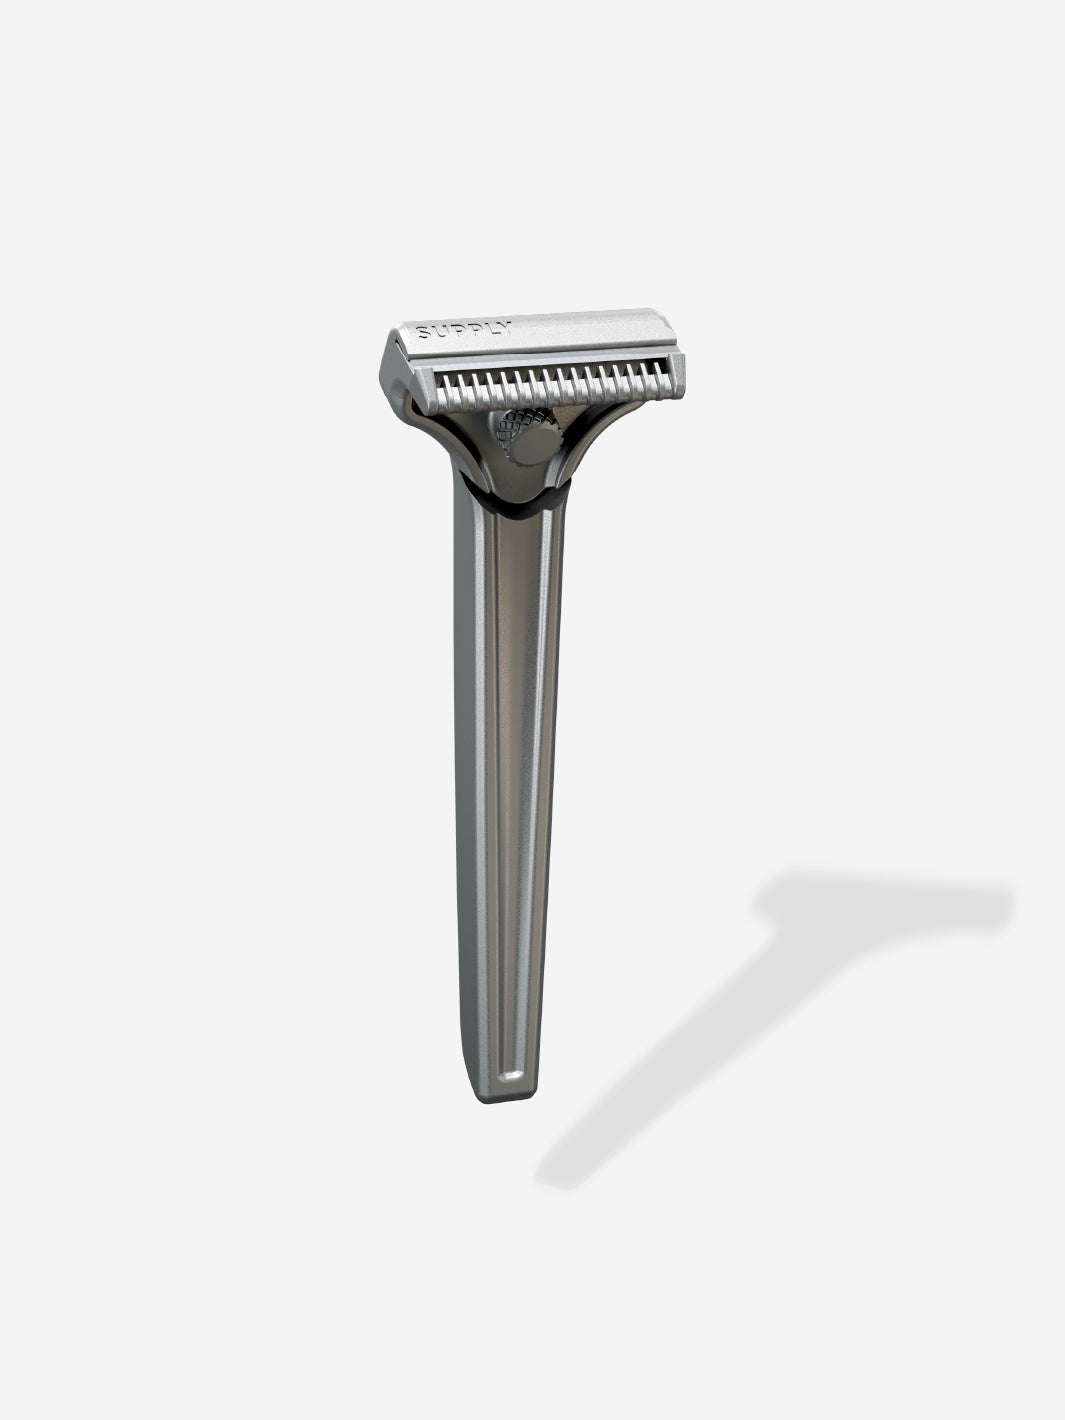 Double Edge Razor Blades: The Different Types And How To Choose